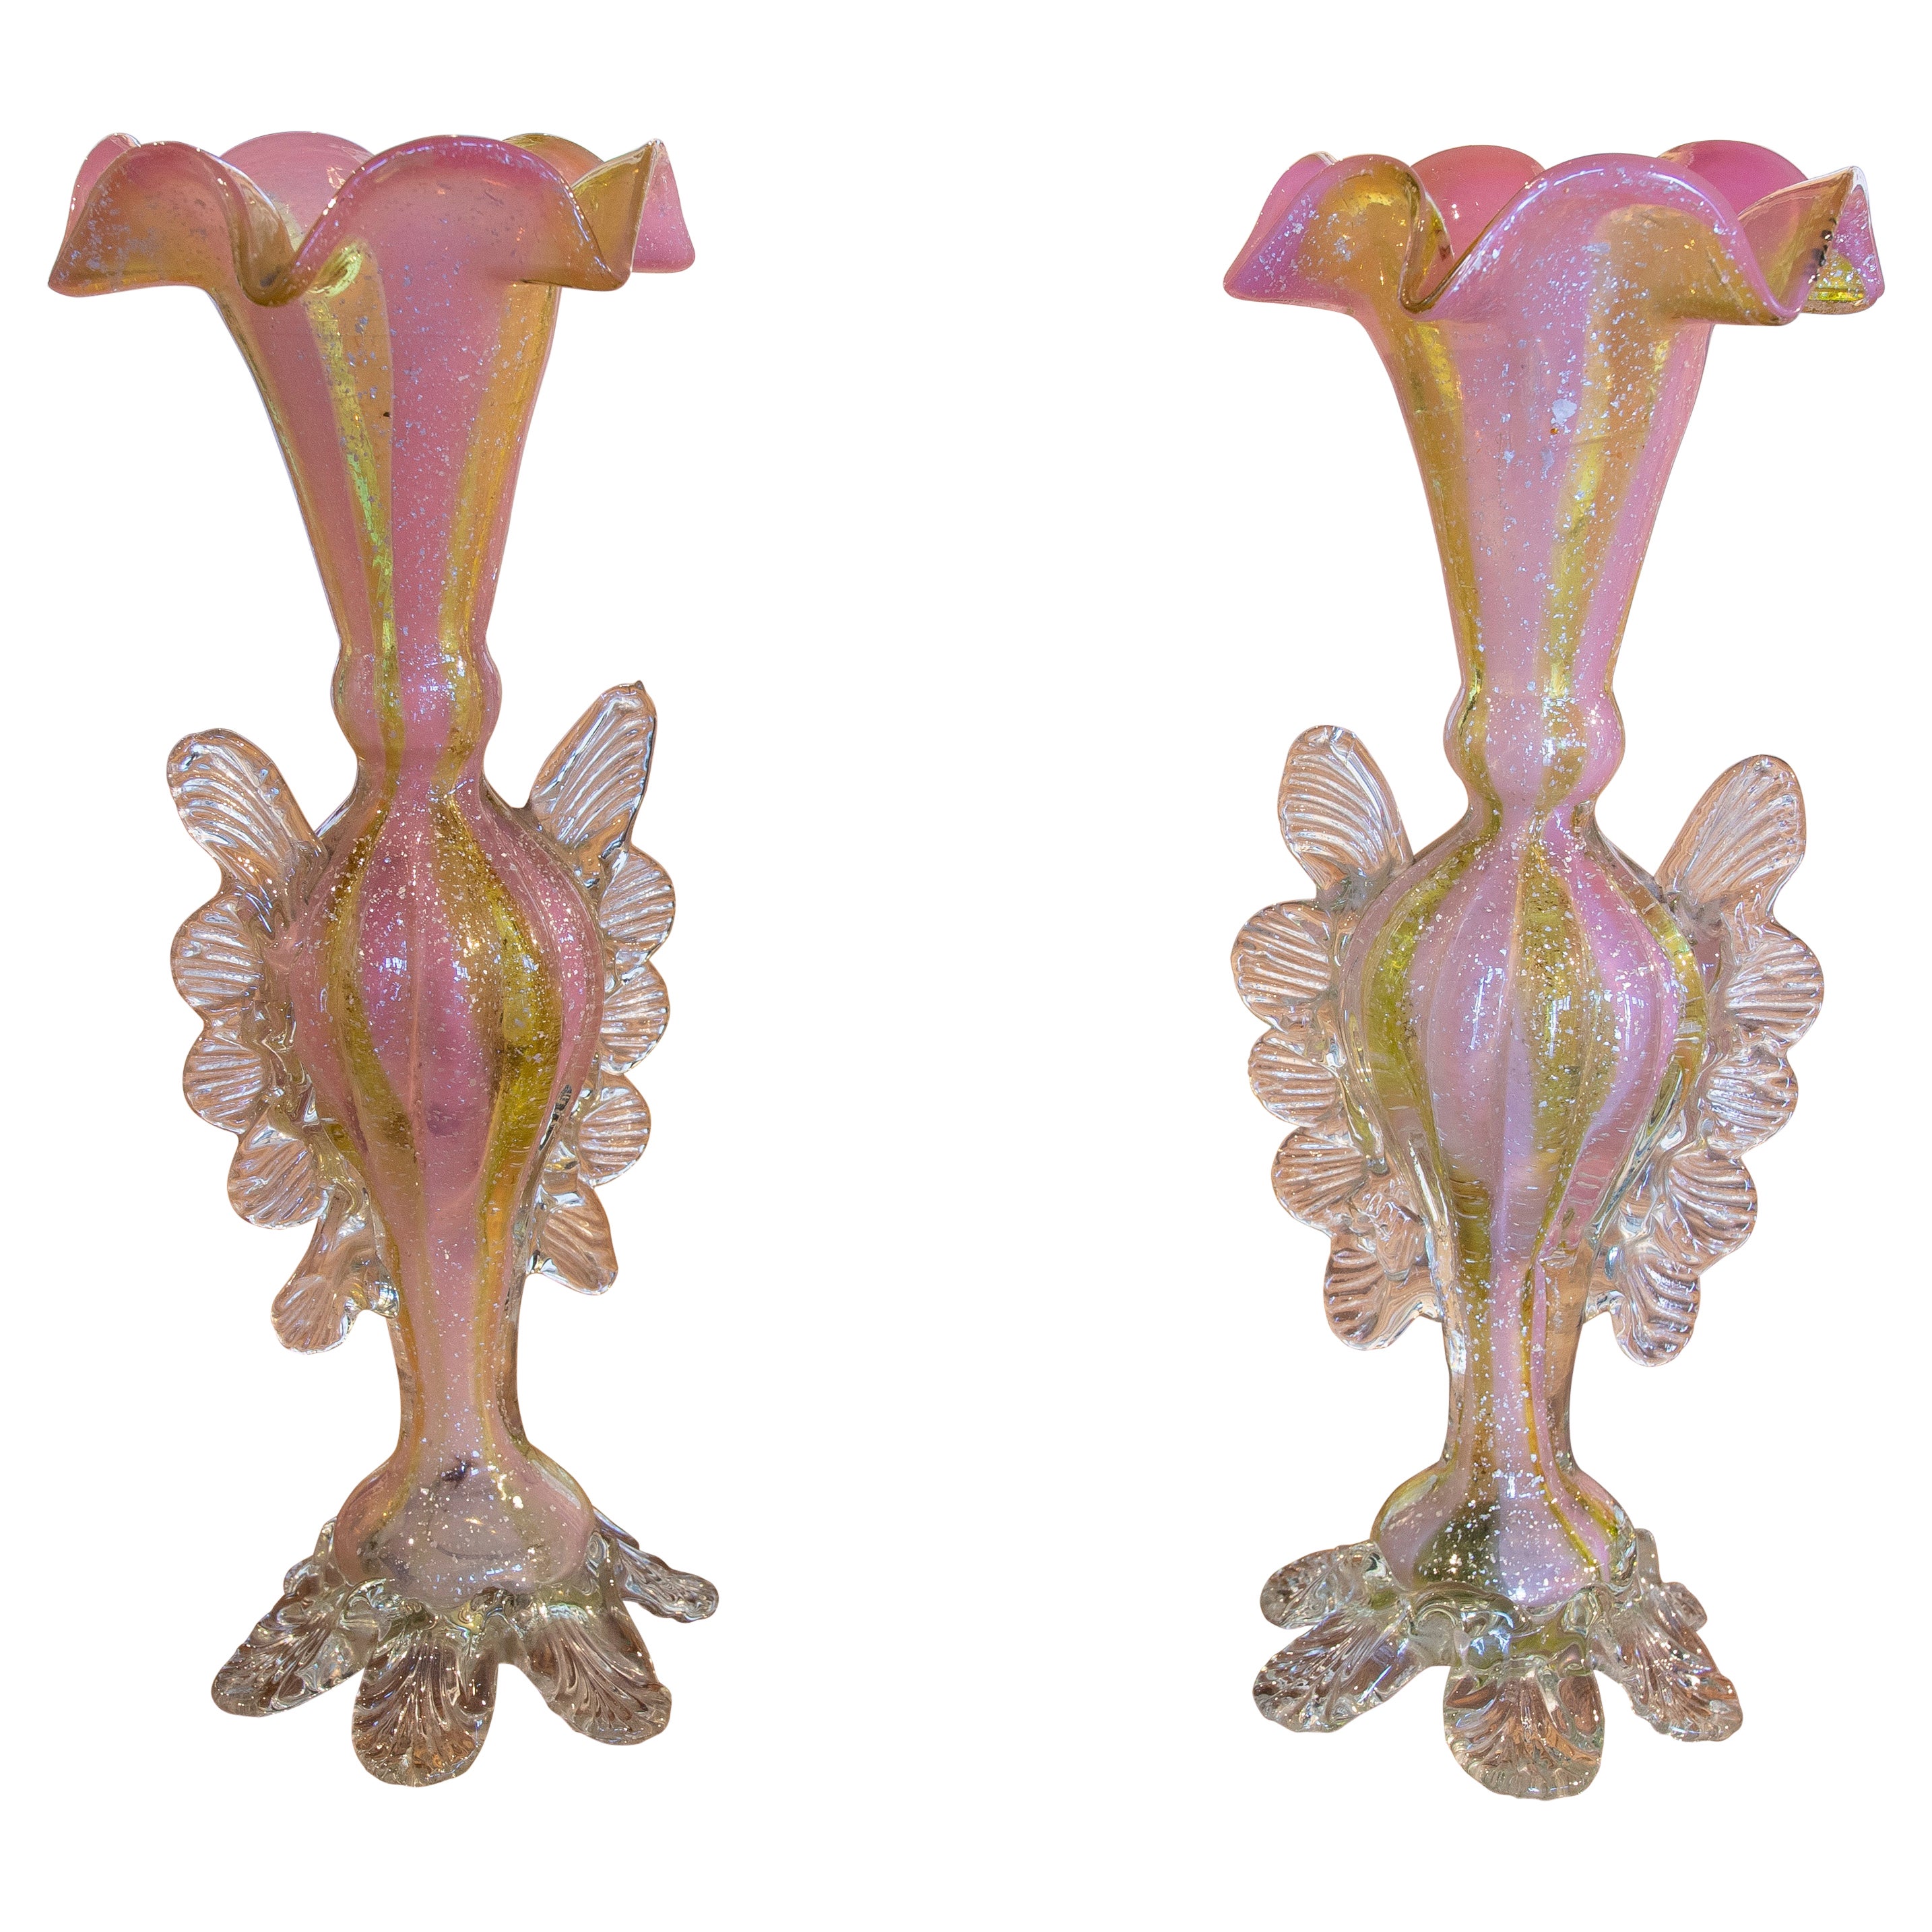 1950s Italian Pair of Murano Glass Vases in Pink Tones  For Sale